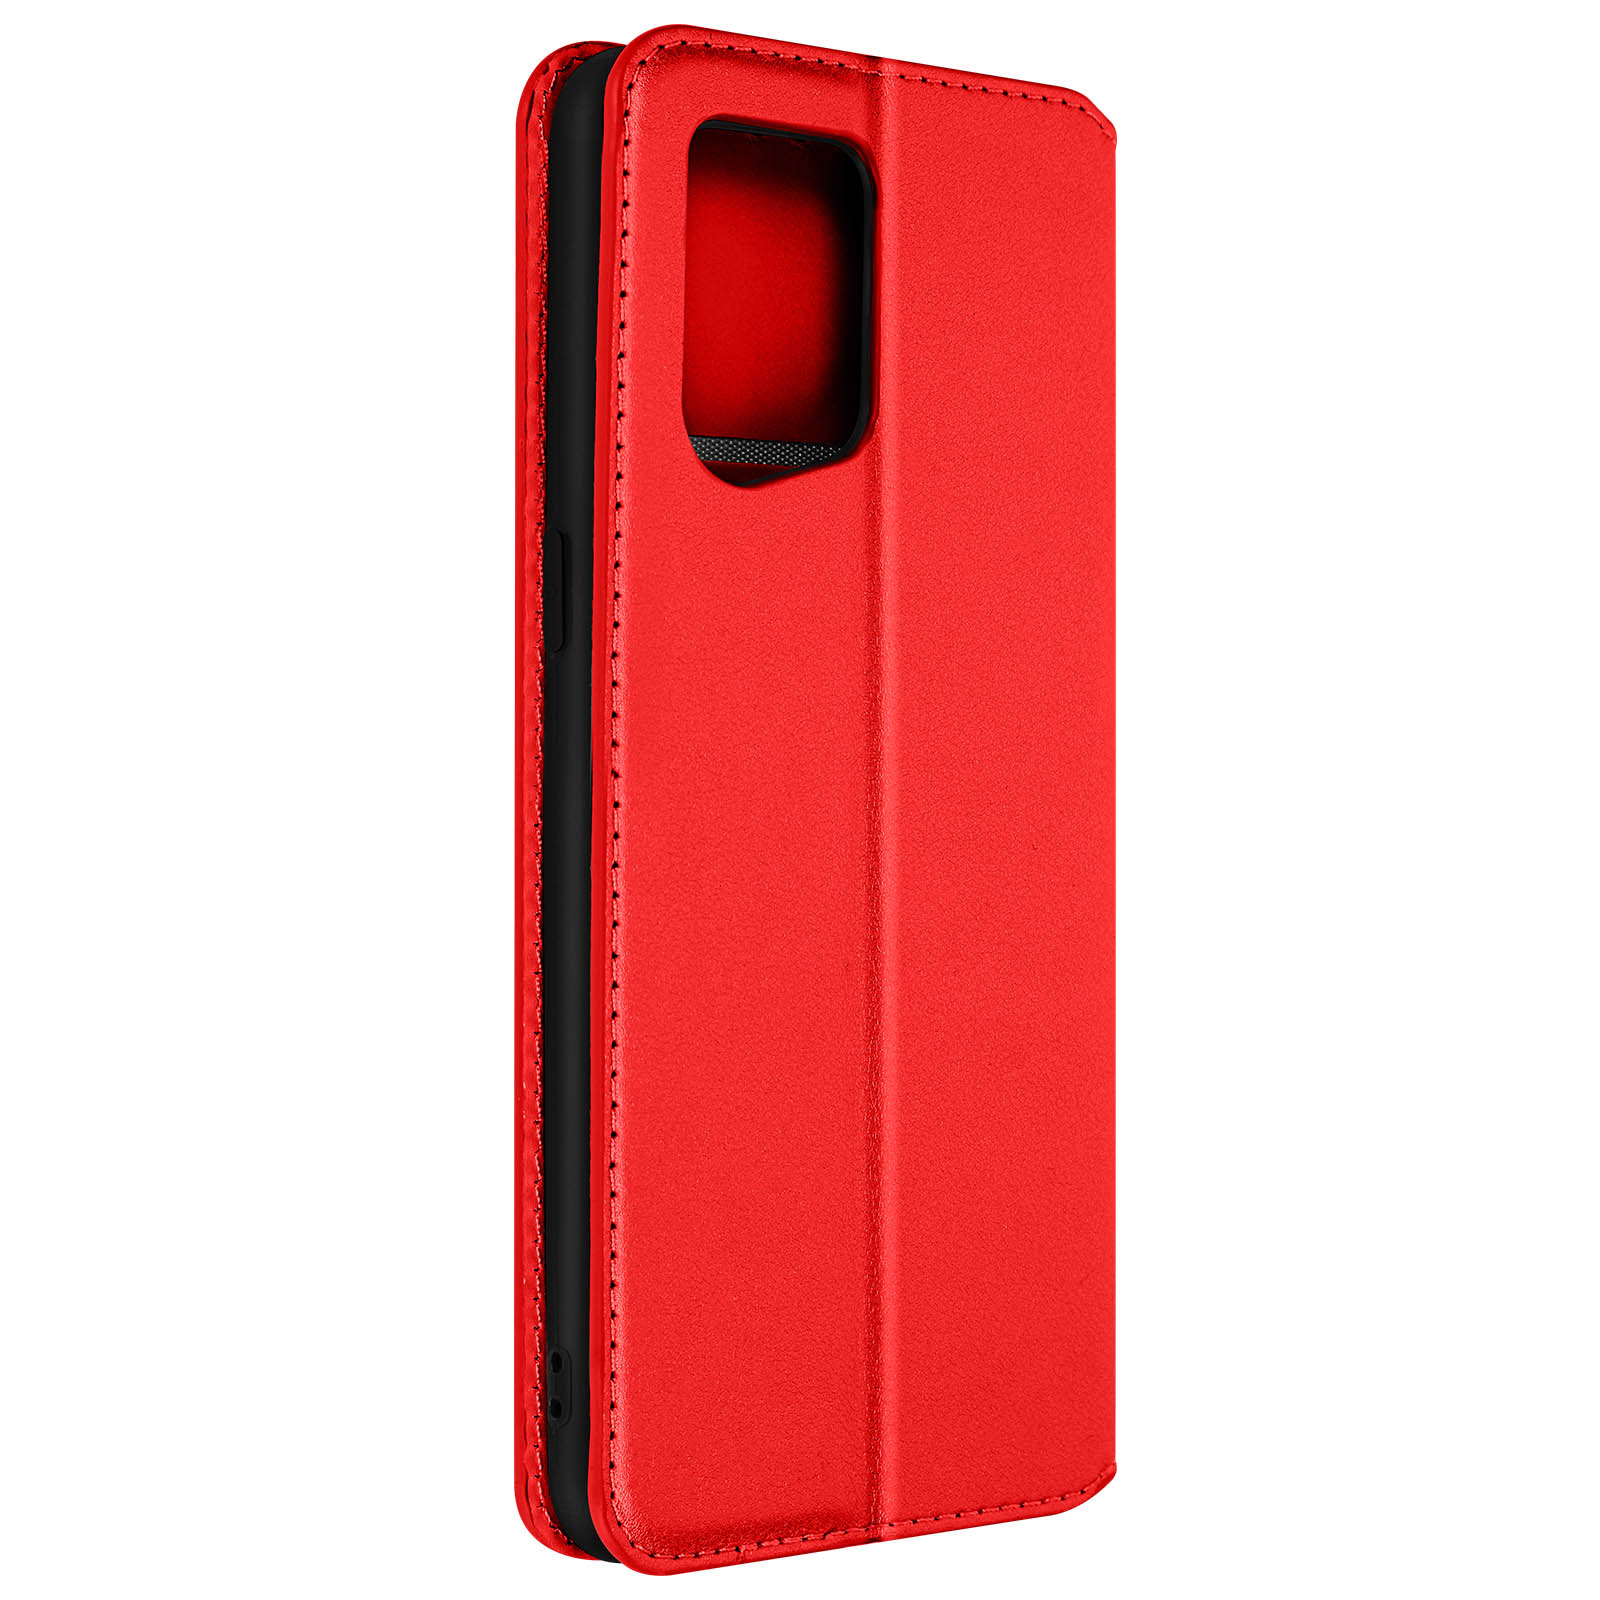 AVIZAR Classic Oppo, Edition, Bookcover, Rot Find Backcover Magnetklappe mit Series, X5, Oppo